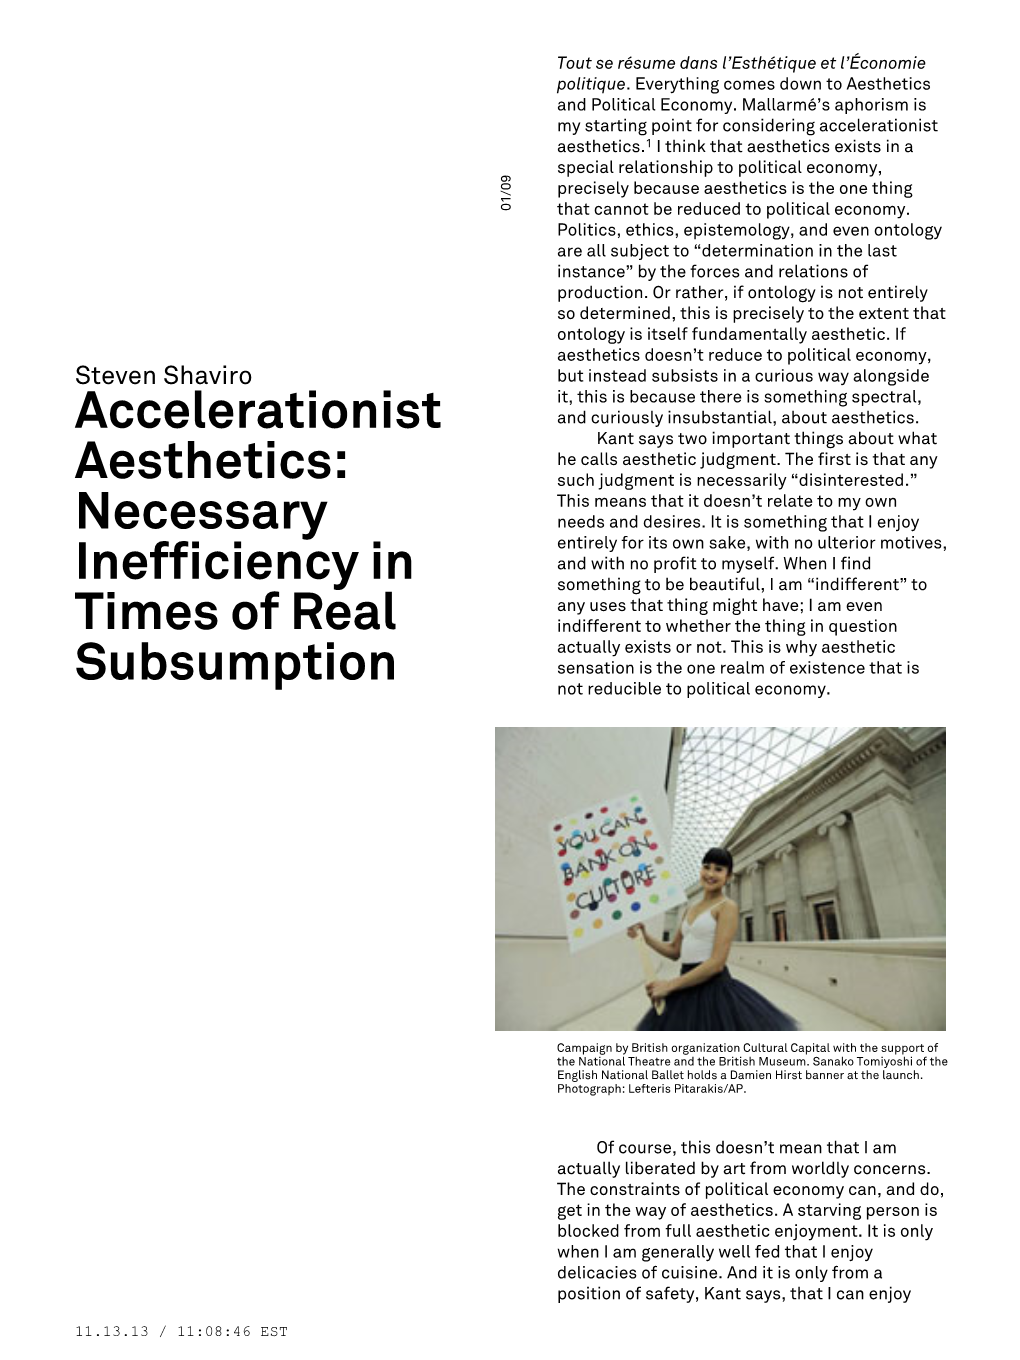 Accelerationist Aesthetics.1 I Think That Aesthetics Exists in a Special Relationship to Political Economy, Precisely Because Aesthetics Is the One Thing